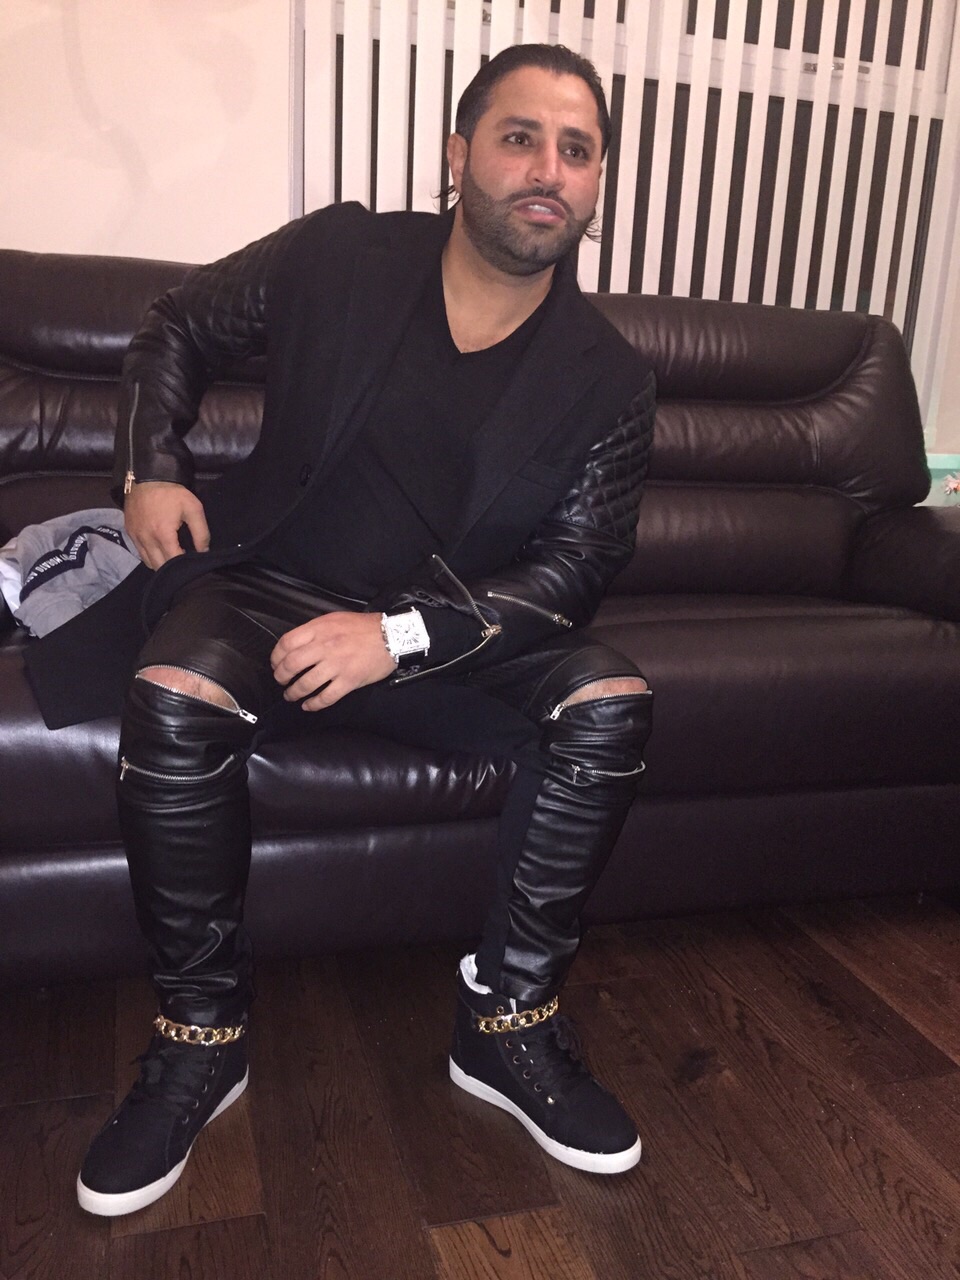 Watching the Boxing wearing jacket from lescott & Stuart biker jeans from Zara black v-neck jumper from Zara and high top boots from Giuseppe Zonnetti Watch by Frank Muller (2014)